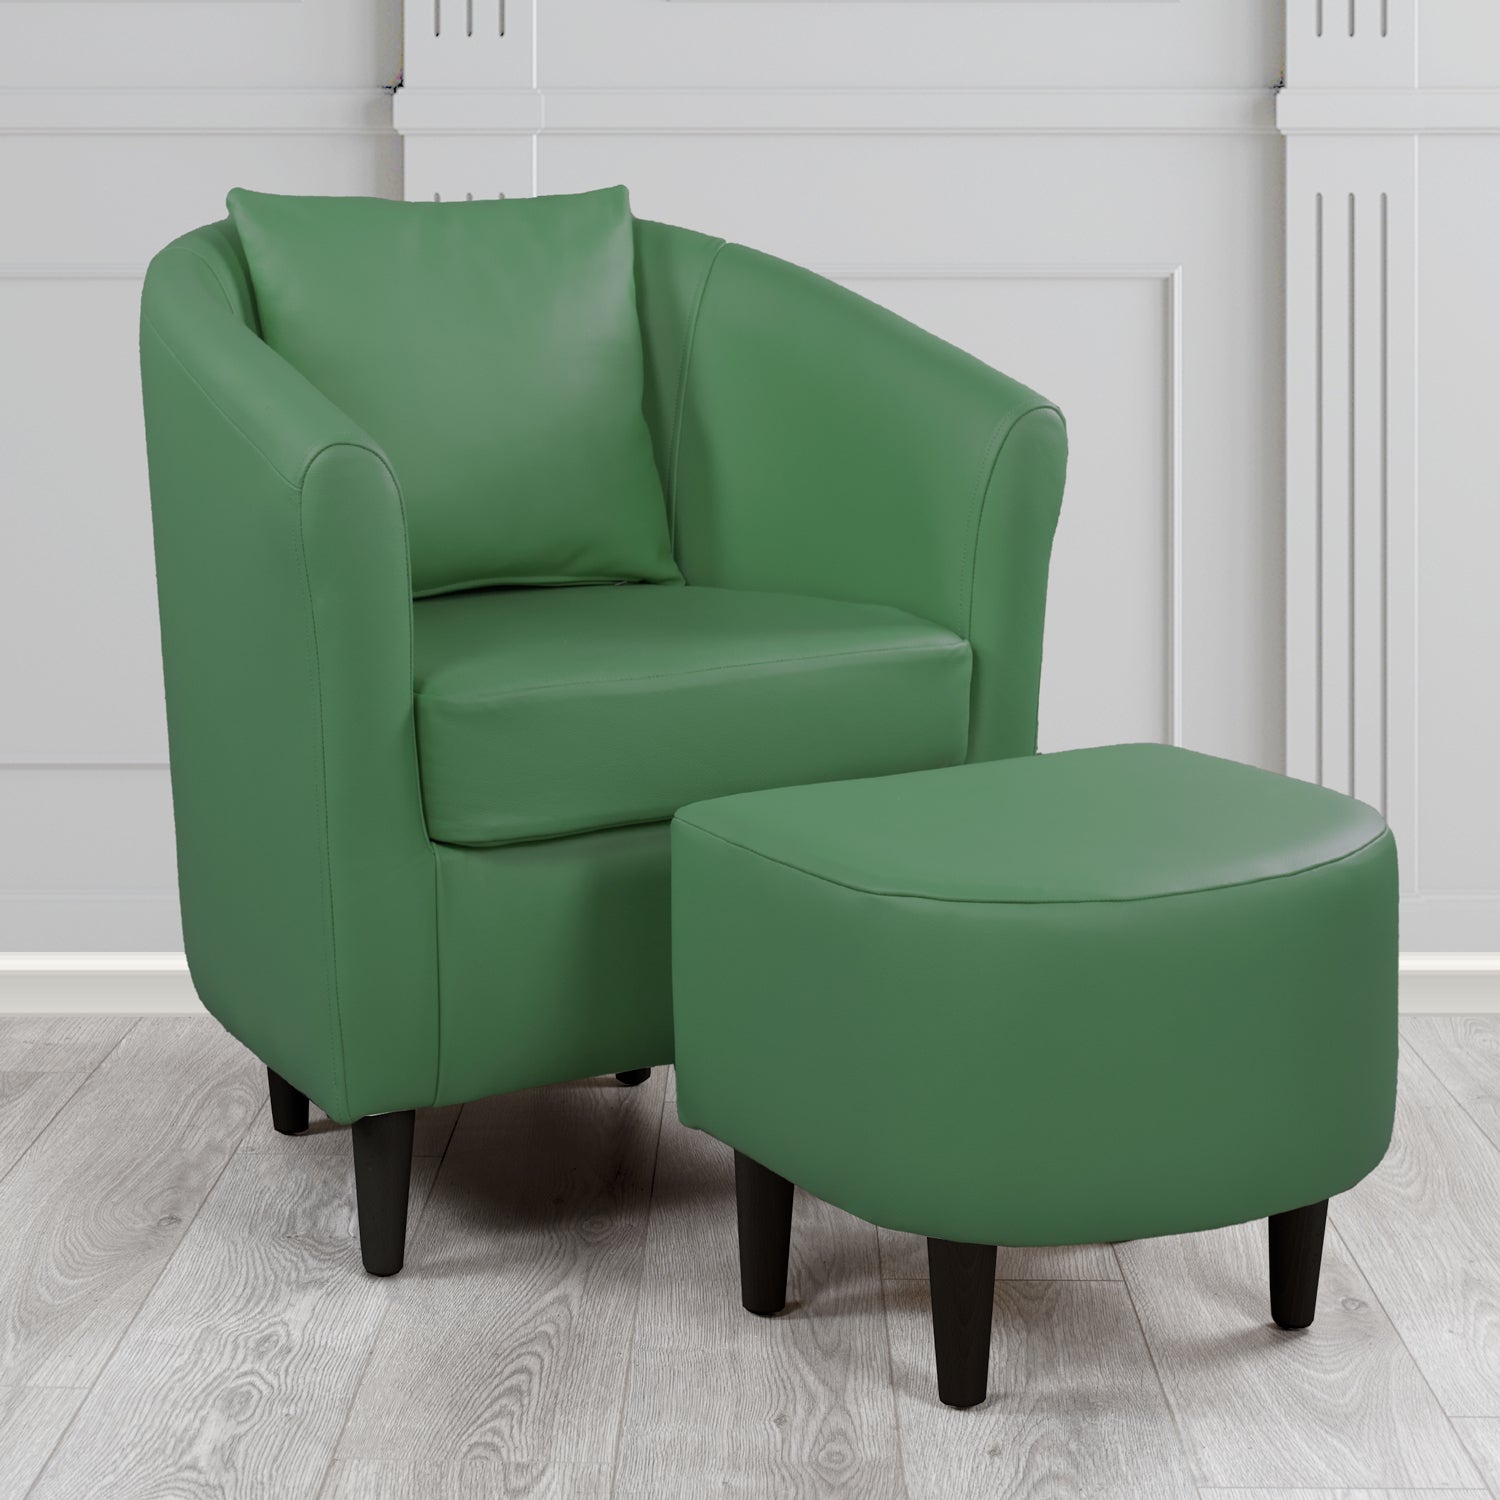 St Tropez Shelly Jade Green Crib 5 Genuine Leather Tub Chair & Footstool Set With Scatter Cushion (6619502870570)